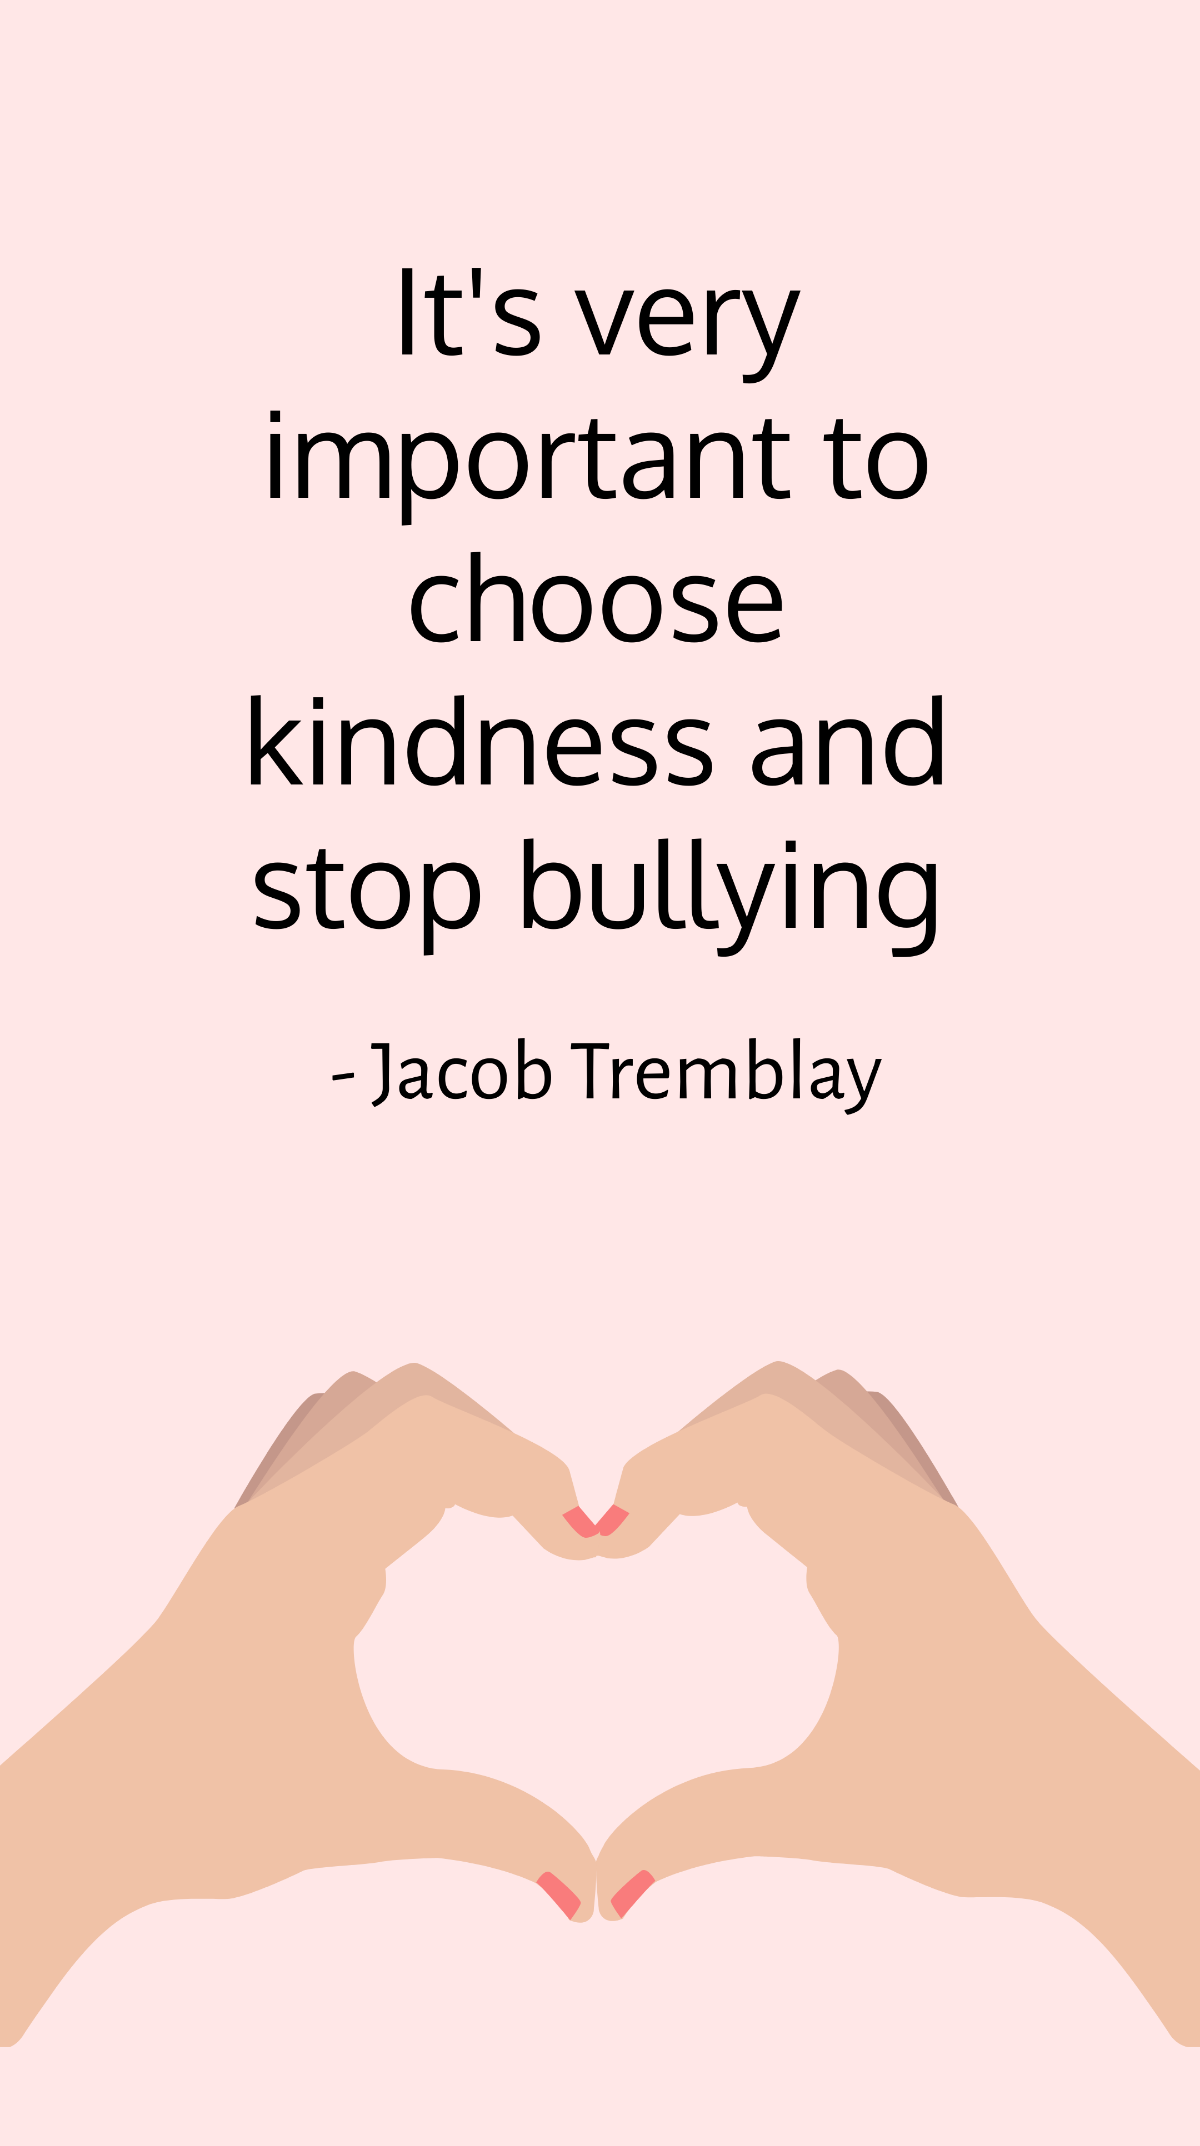 Jacob Tremblay - It's very important to choose kindness and stop bullying